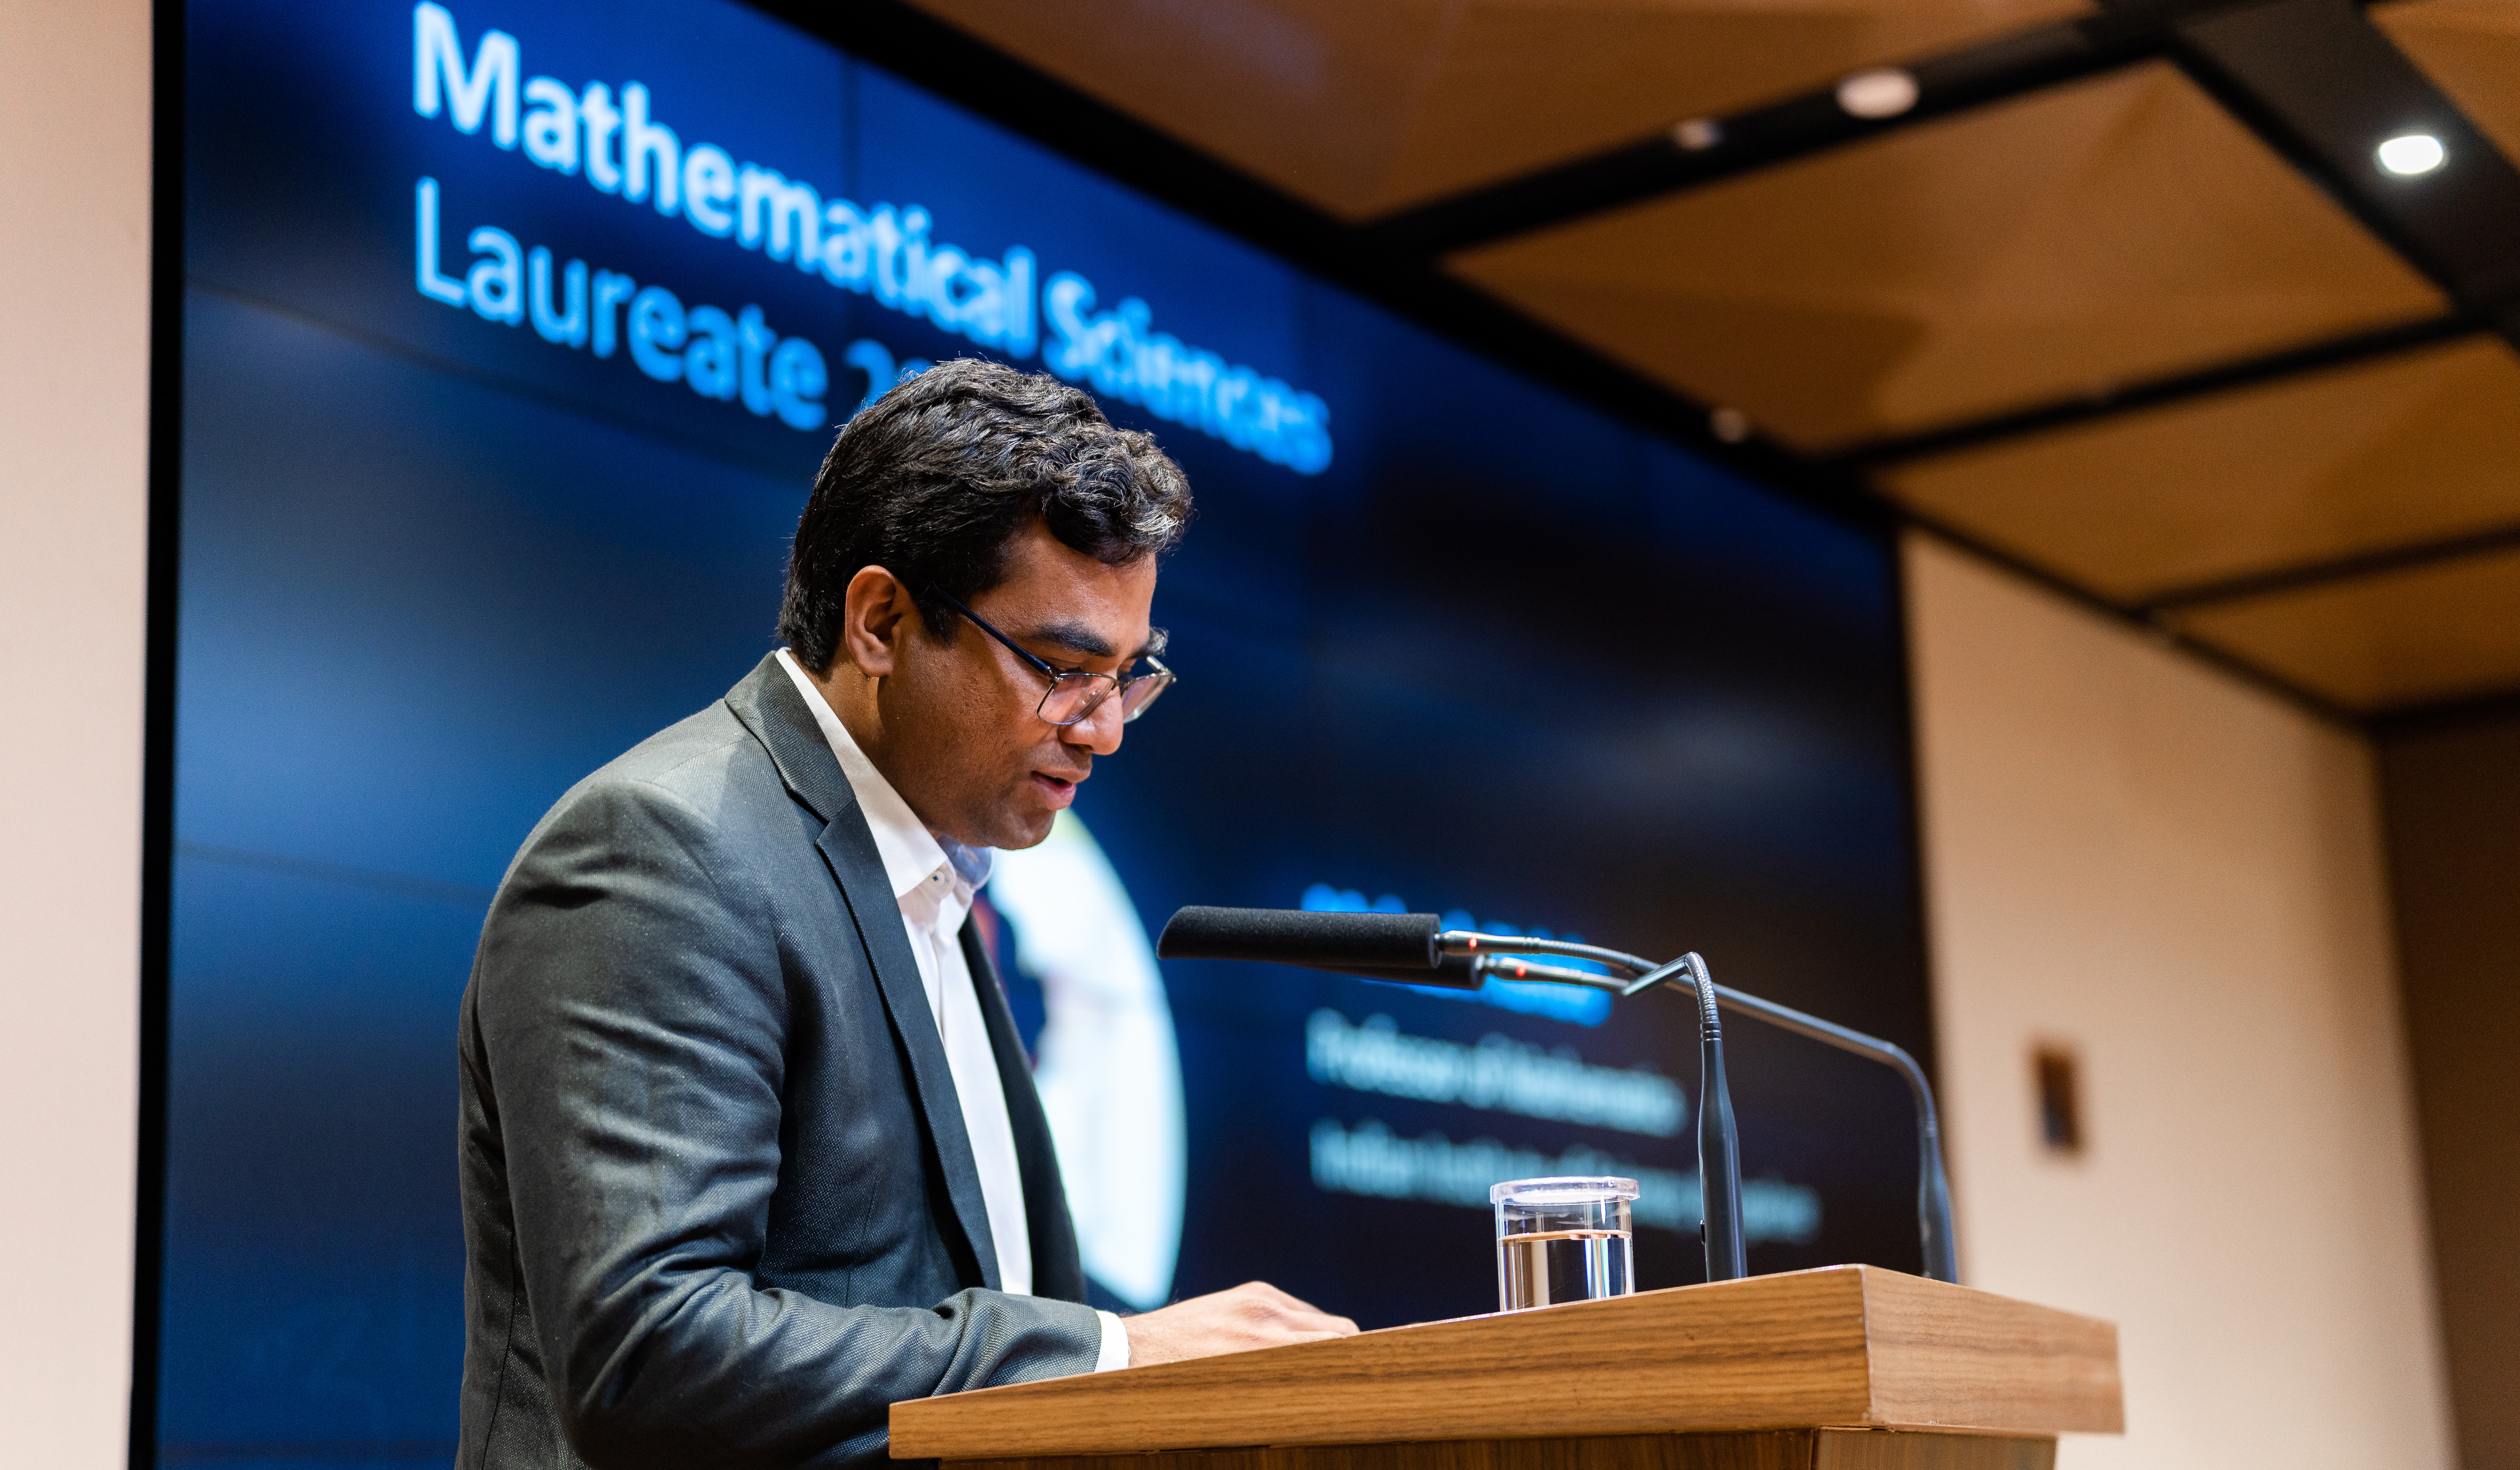 2022 Infosys Prize laureate in Mathematical Science, Mahesh Kakde